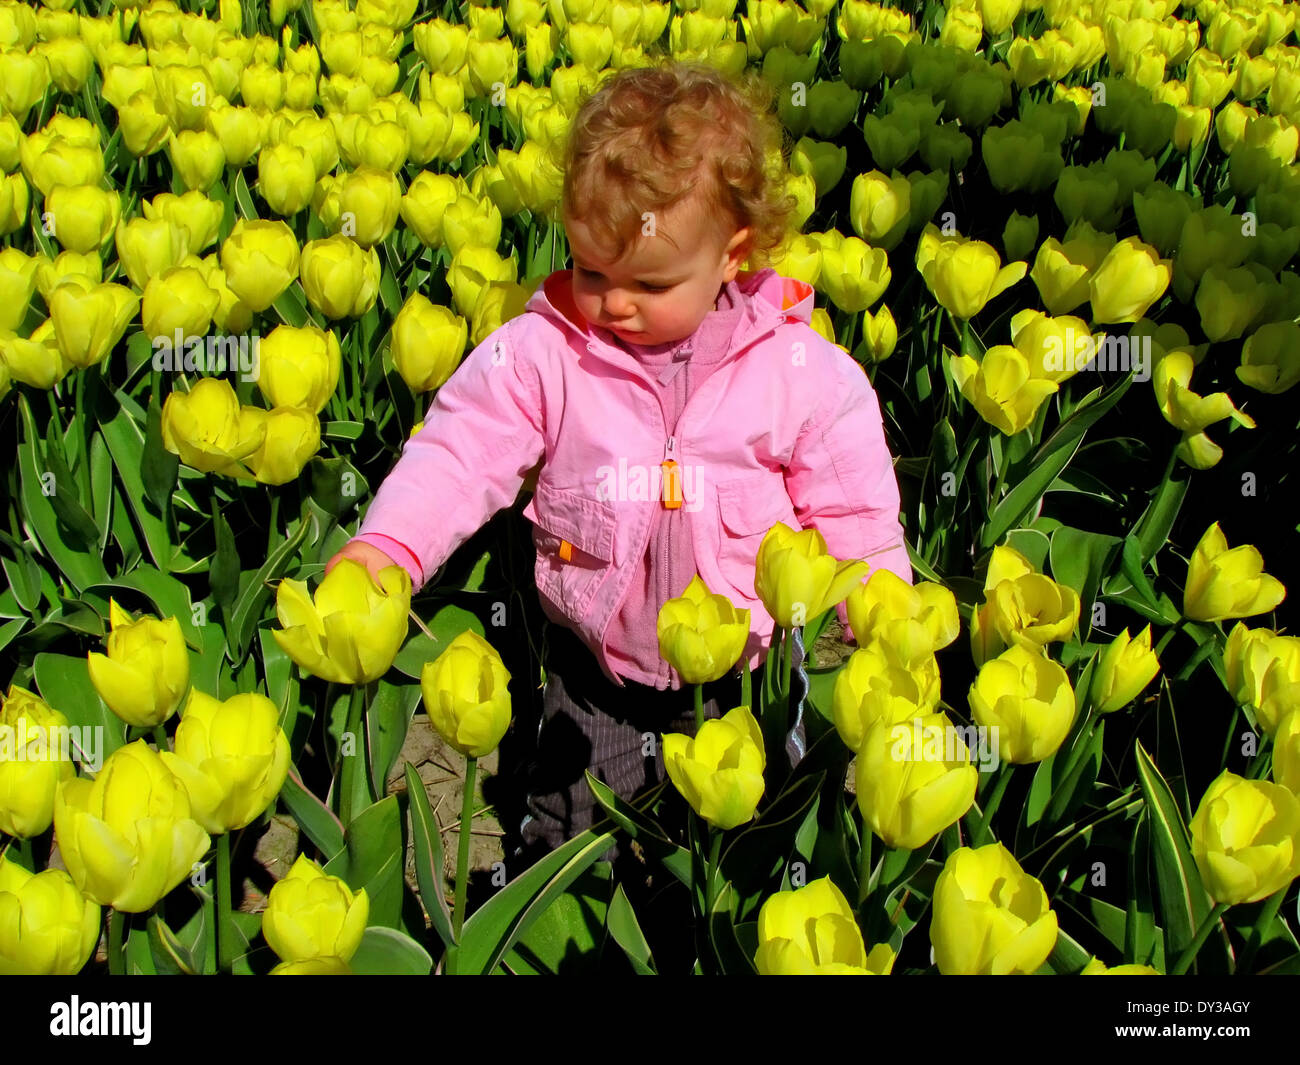 Spring time in The Netherlands: A little girl is standing in a bulb field  between yellow tulips. Stock Photo